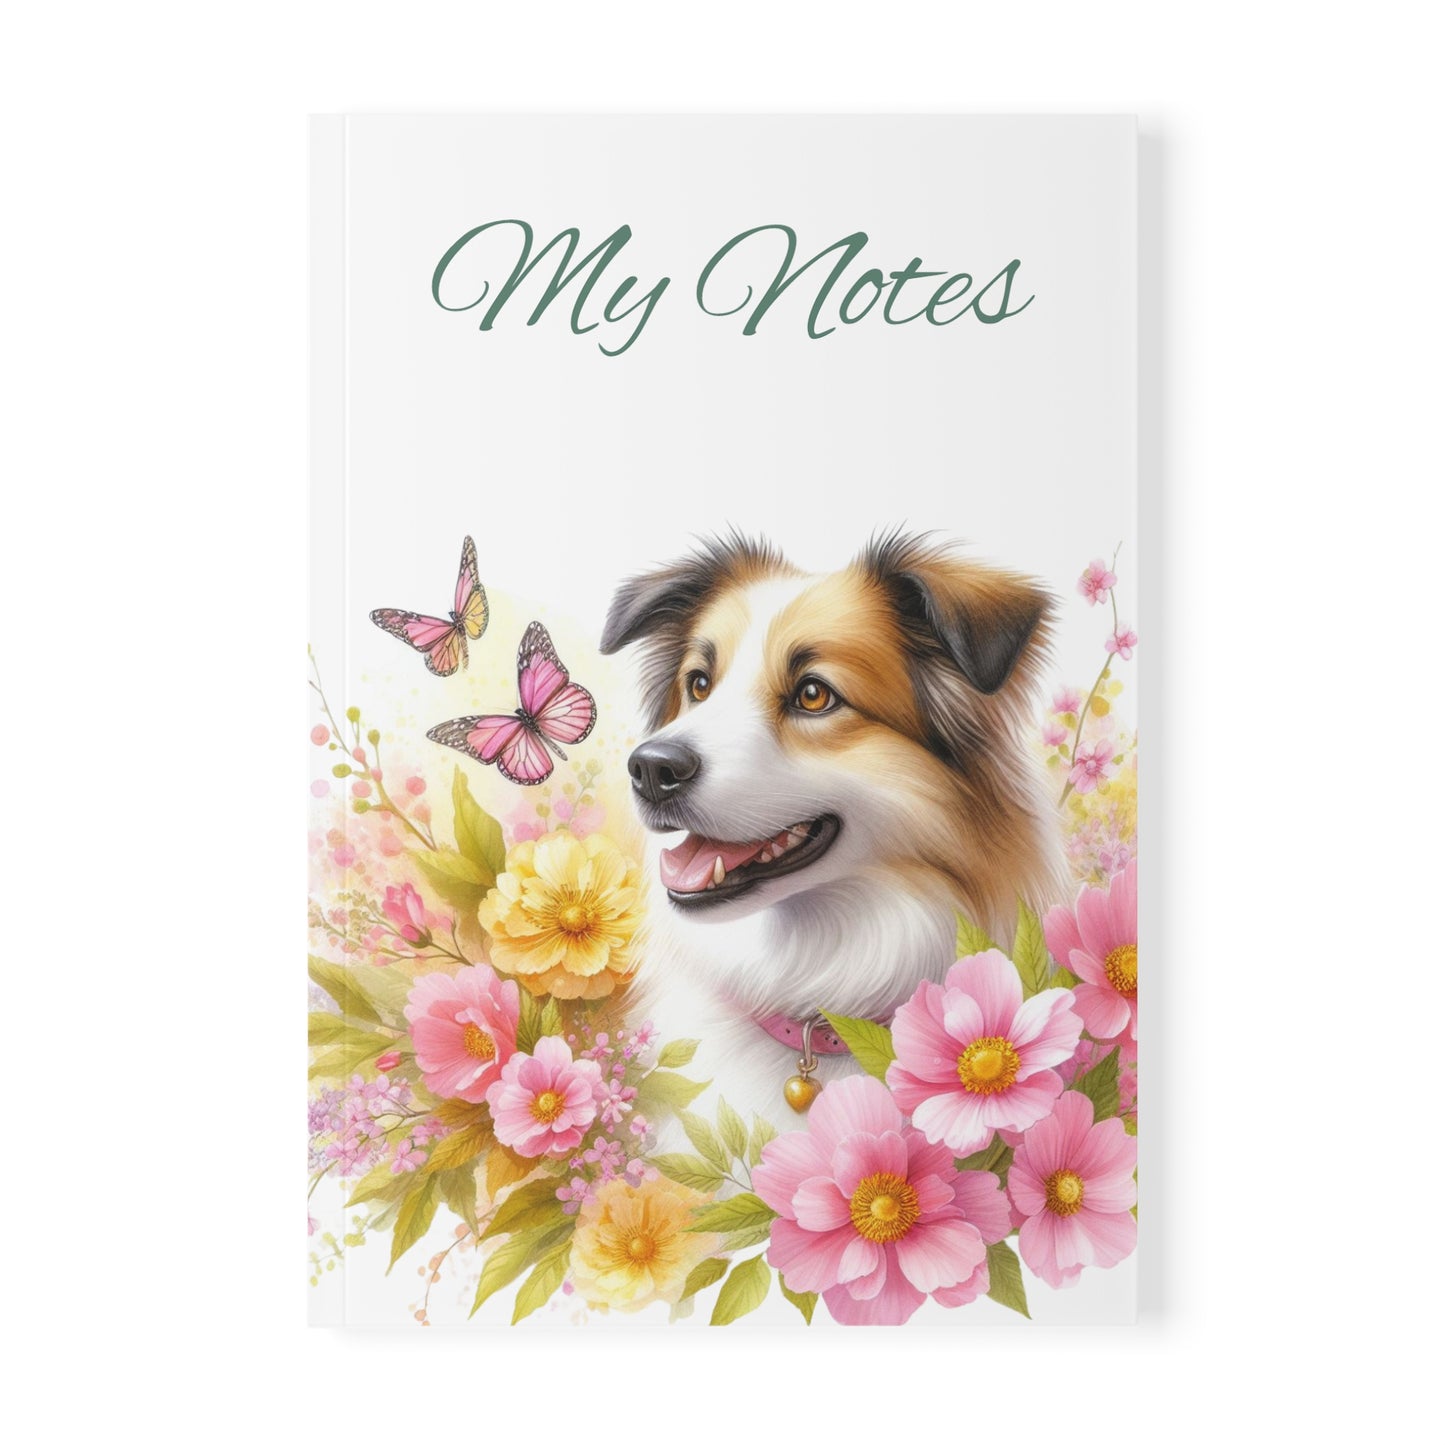 Collie Notebook | Stationery by Hope Valley Home